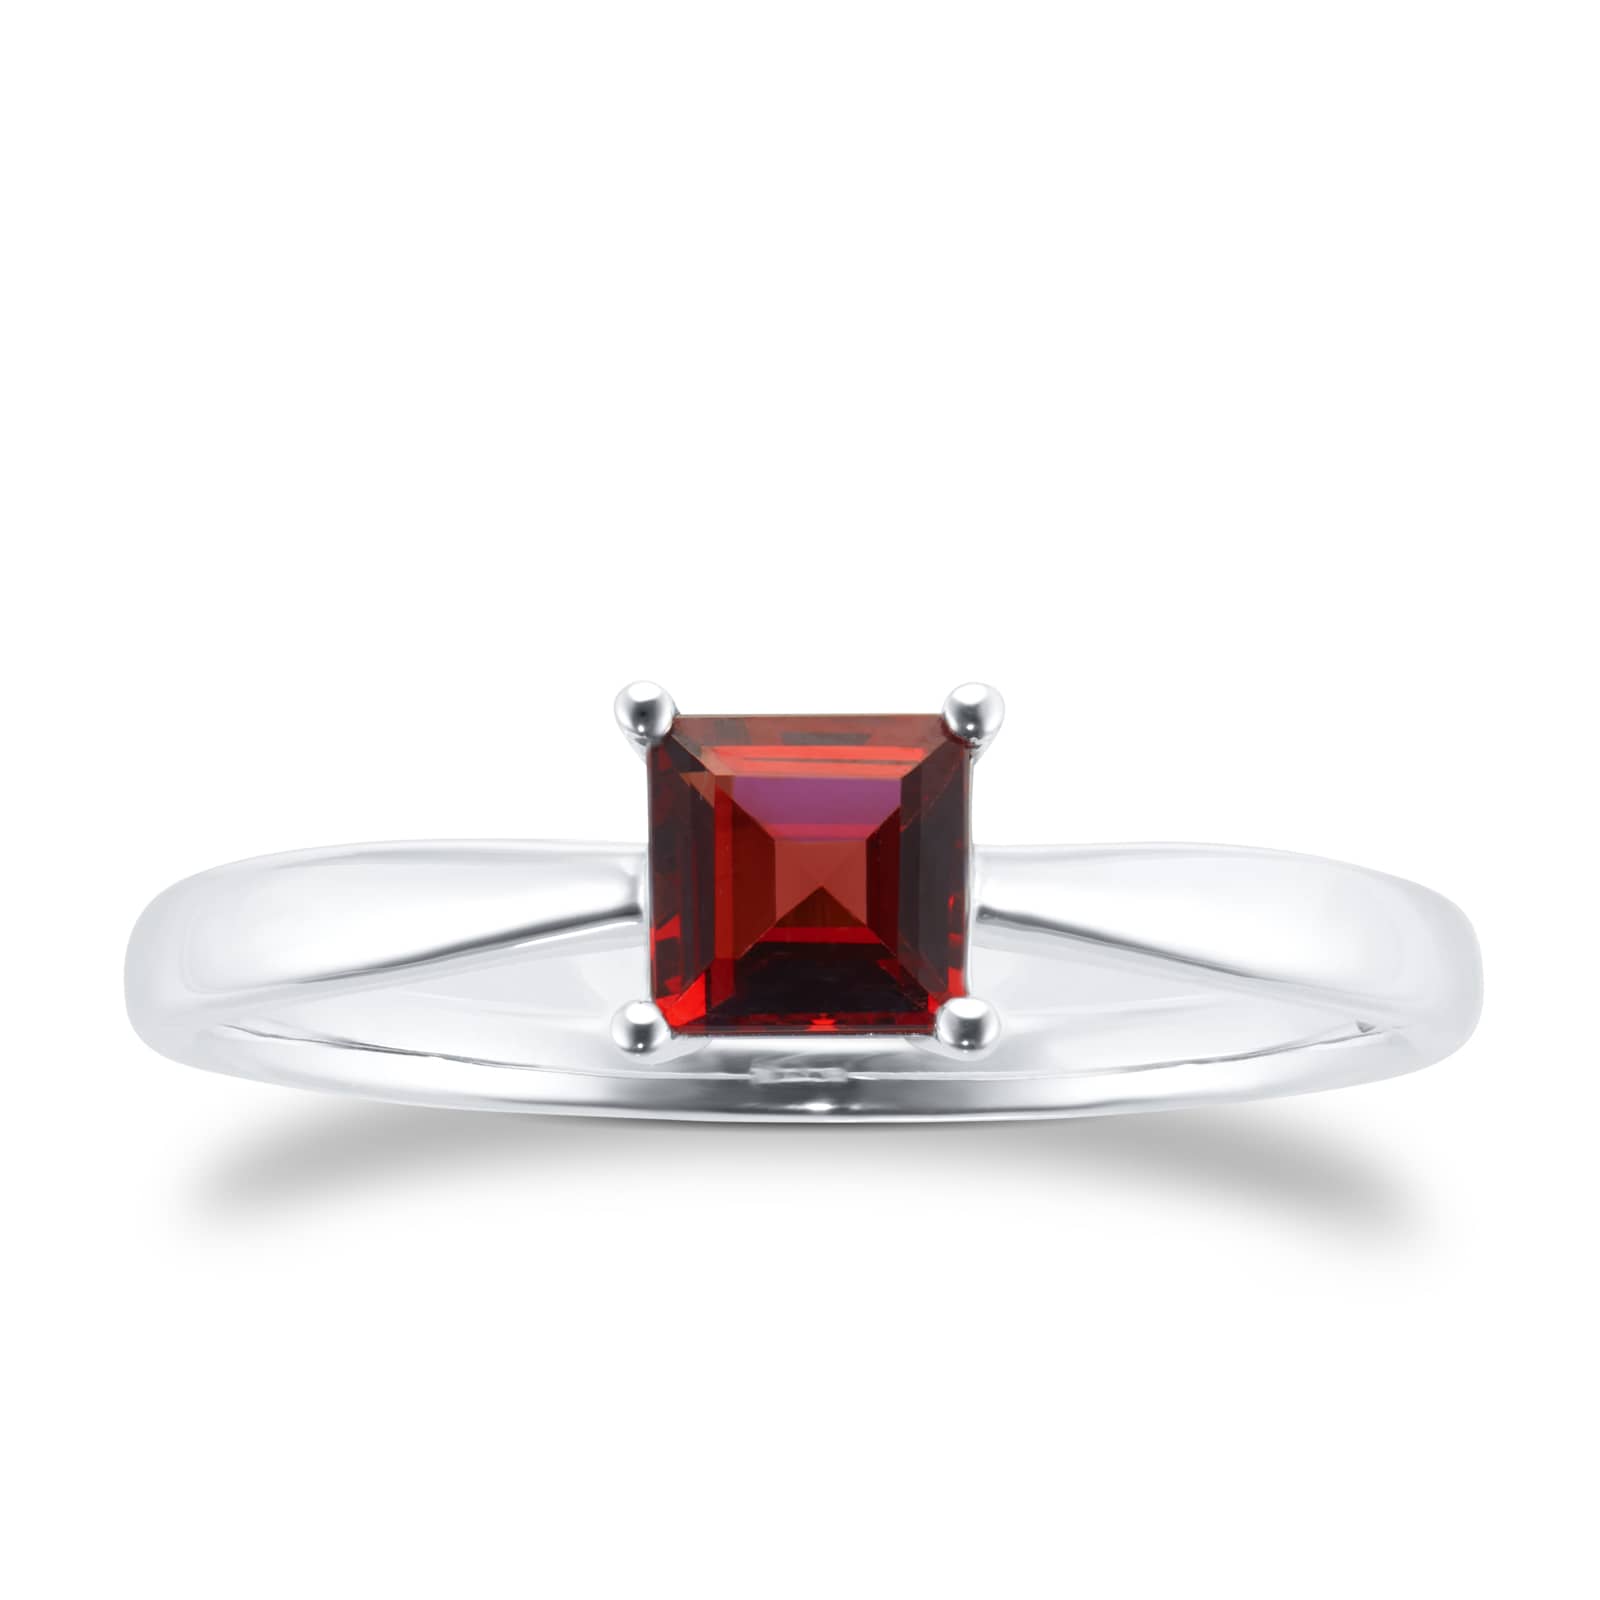 9ct White Gold 4 Claw Square Garnet 5mm x 5mm Ring- Ring Size C.5